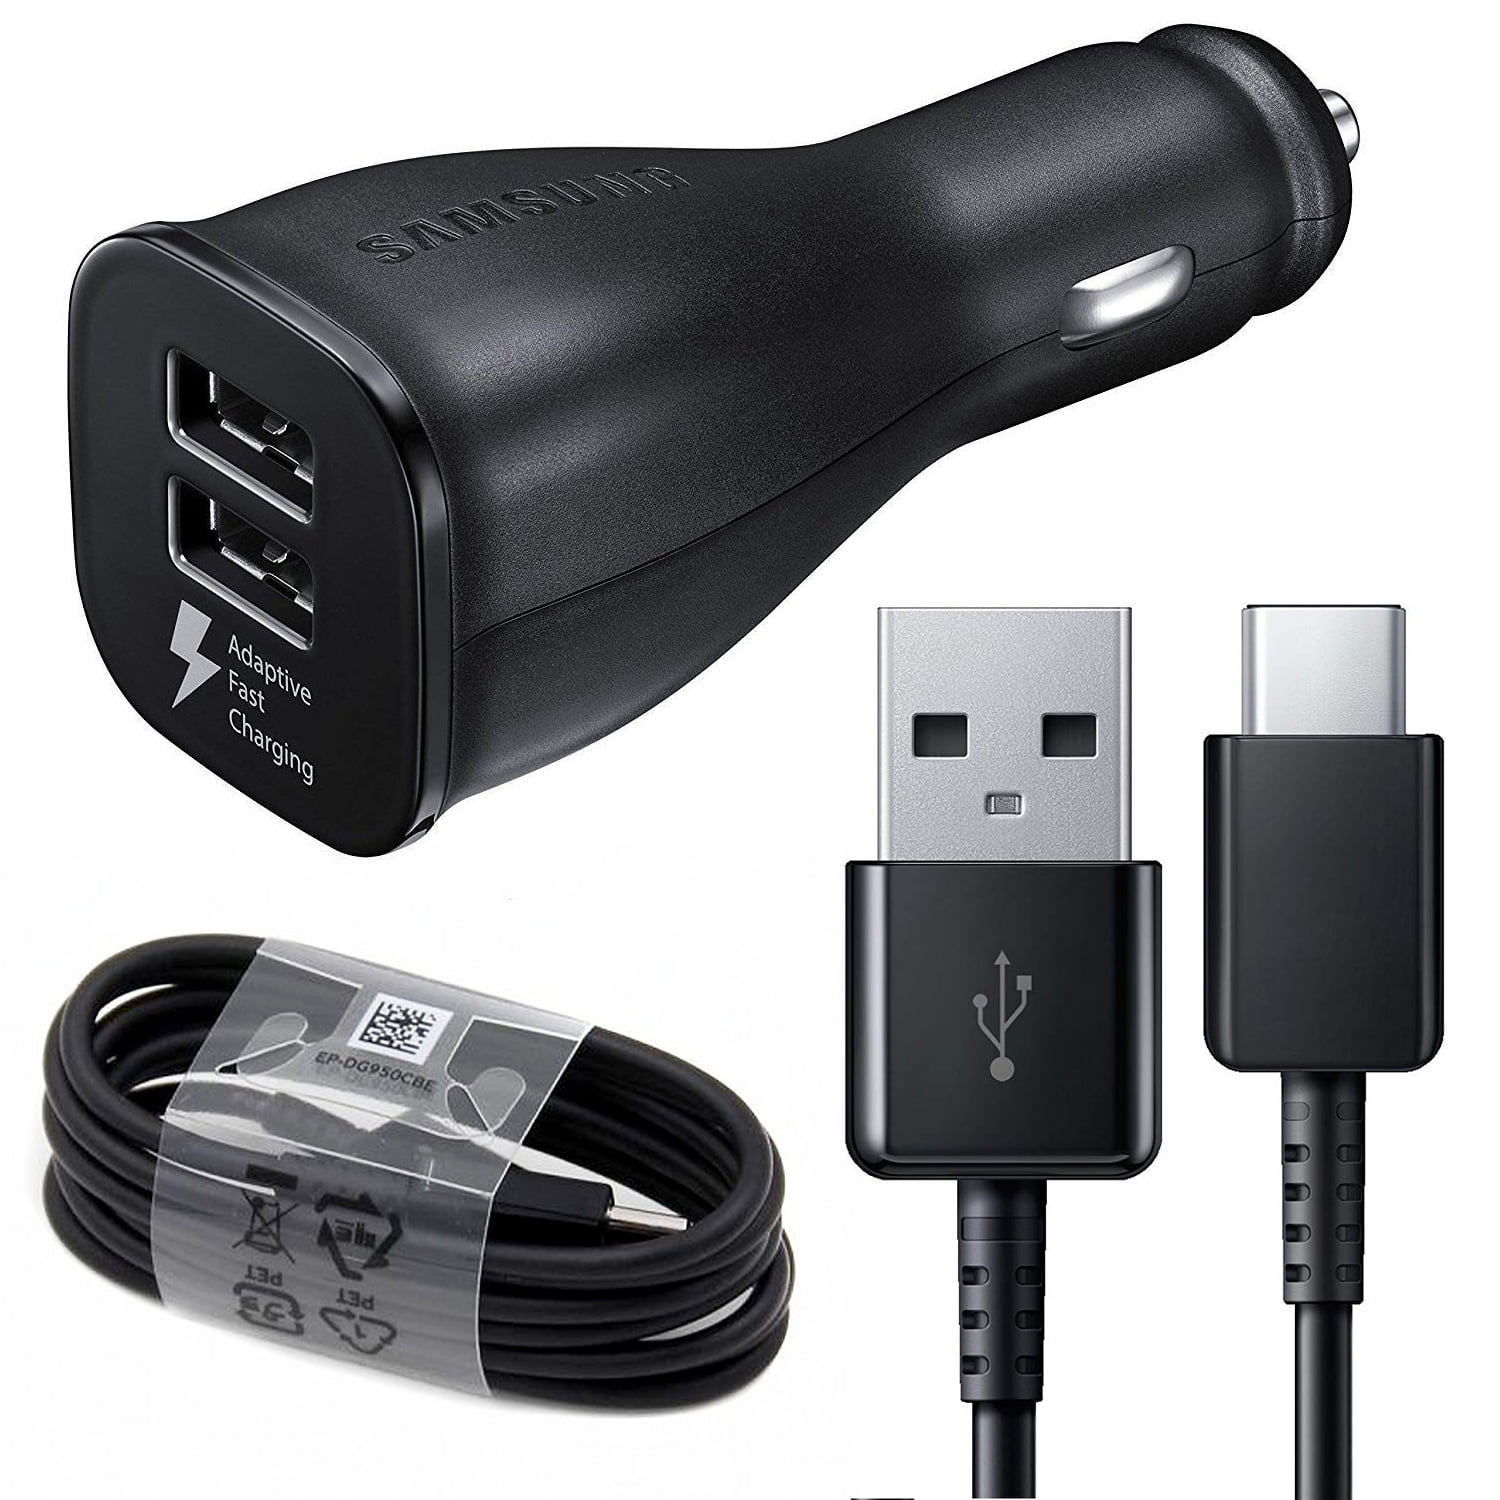 S9 Note 8 S8 Plus High Output 15Watt S9 + 3.0 Amp S8 S8+ Cellet Made USB Type-C Retractable Car Vehicle Charger Compatible for Galaxy Note 9 S9 Plus Fast Charging S8 Plus S8 Active PUSBC30R_WS9